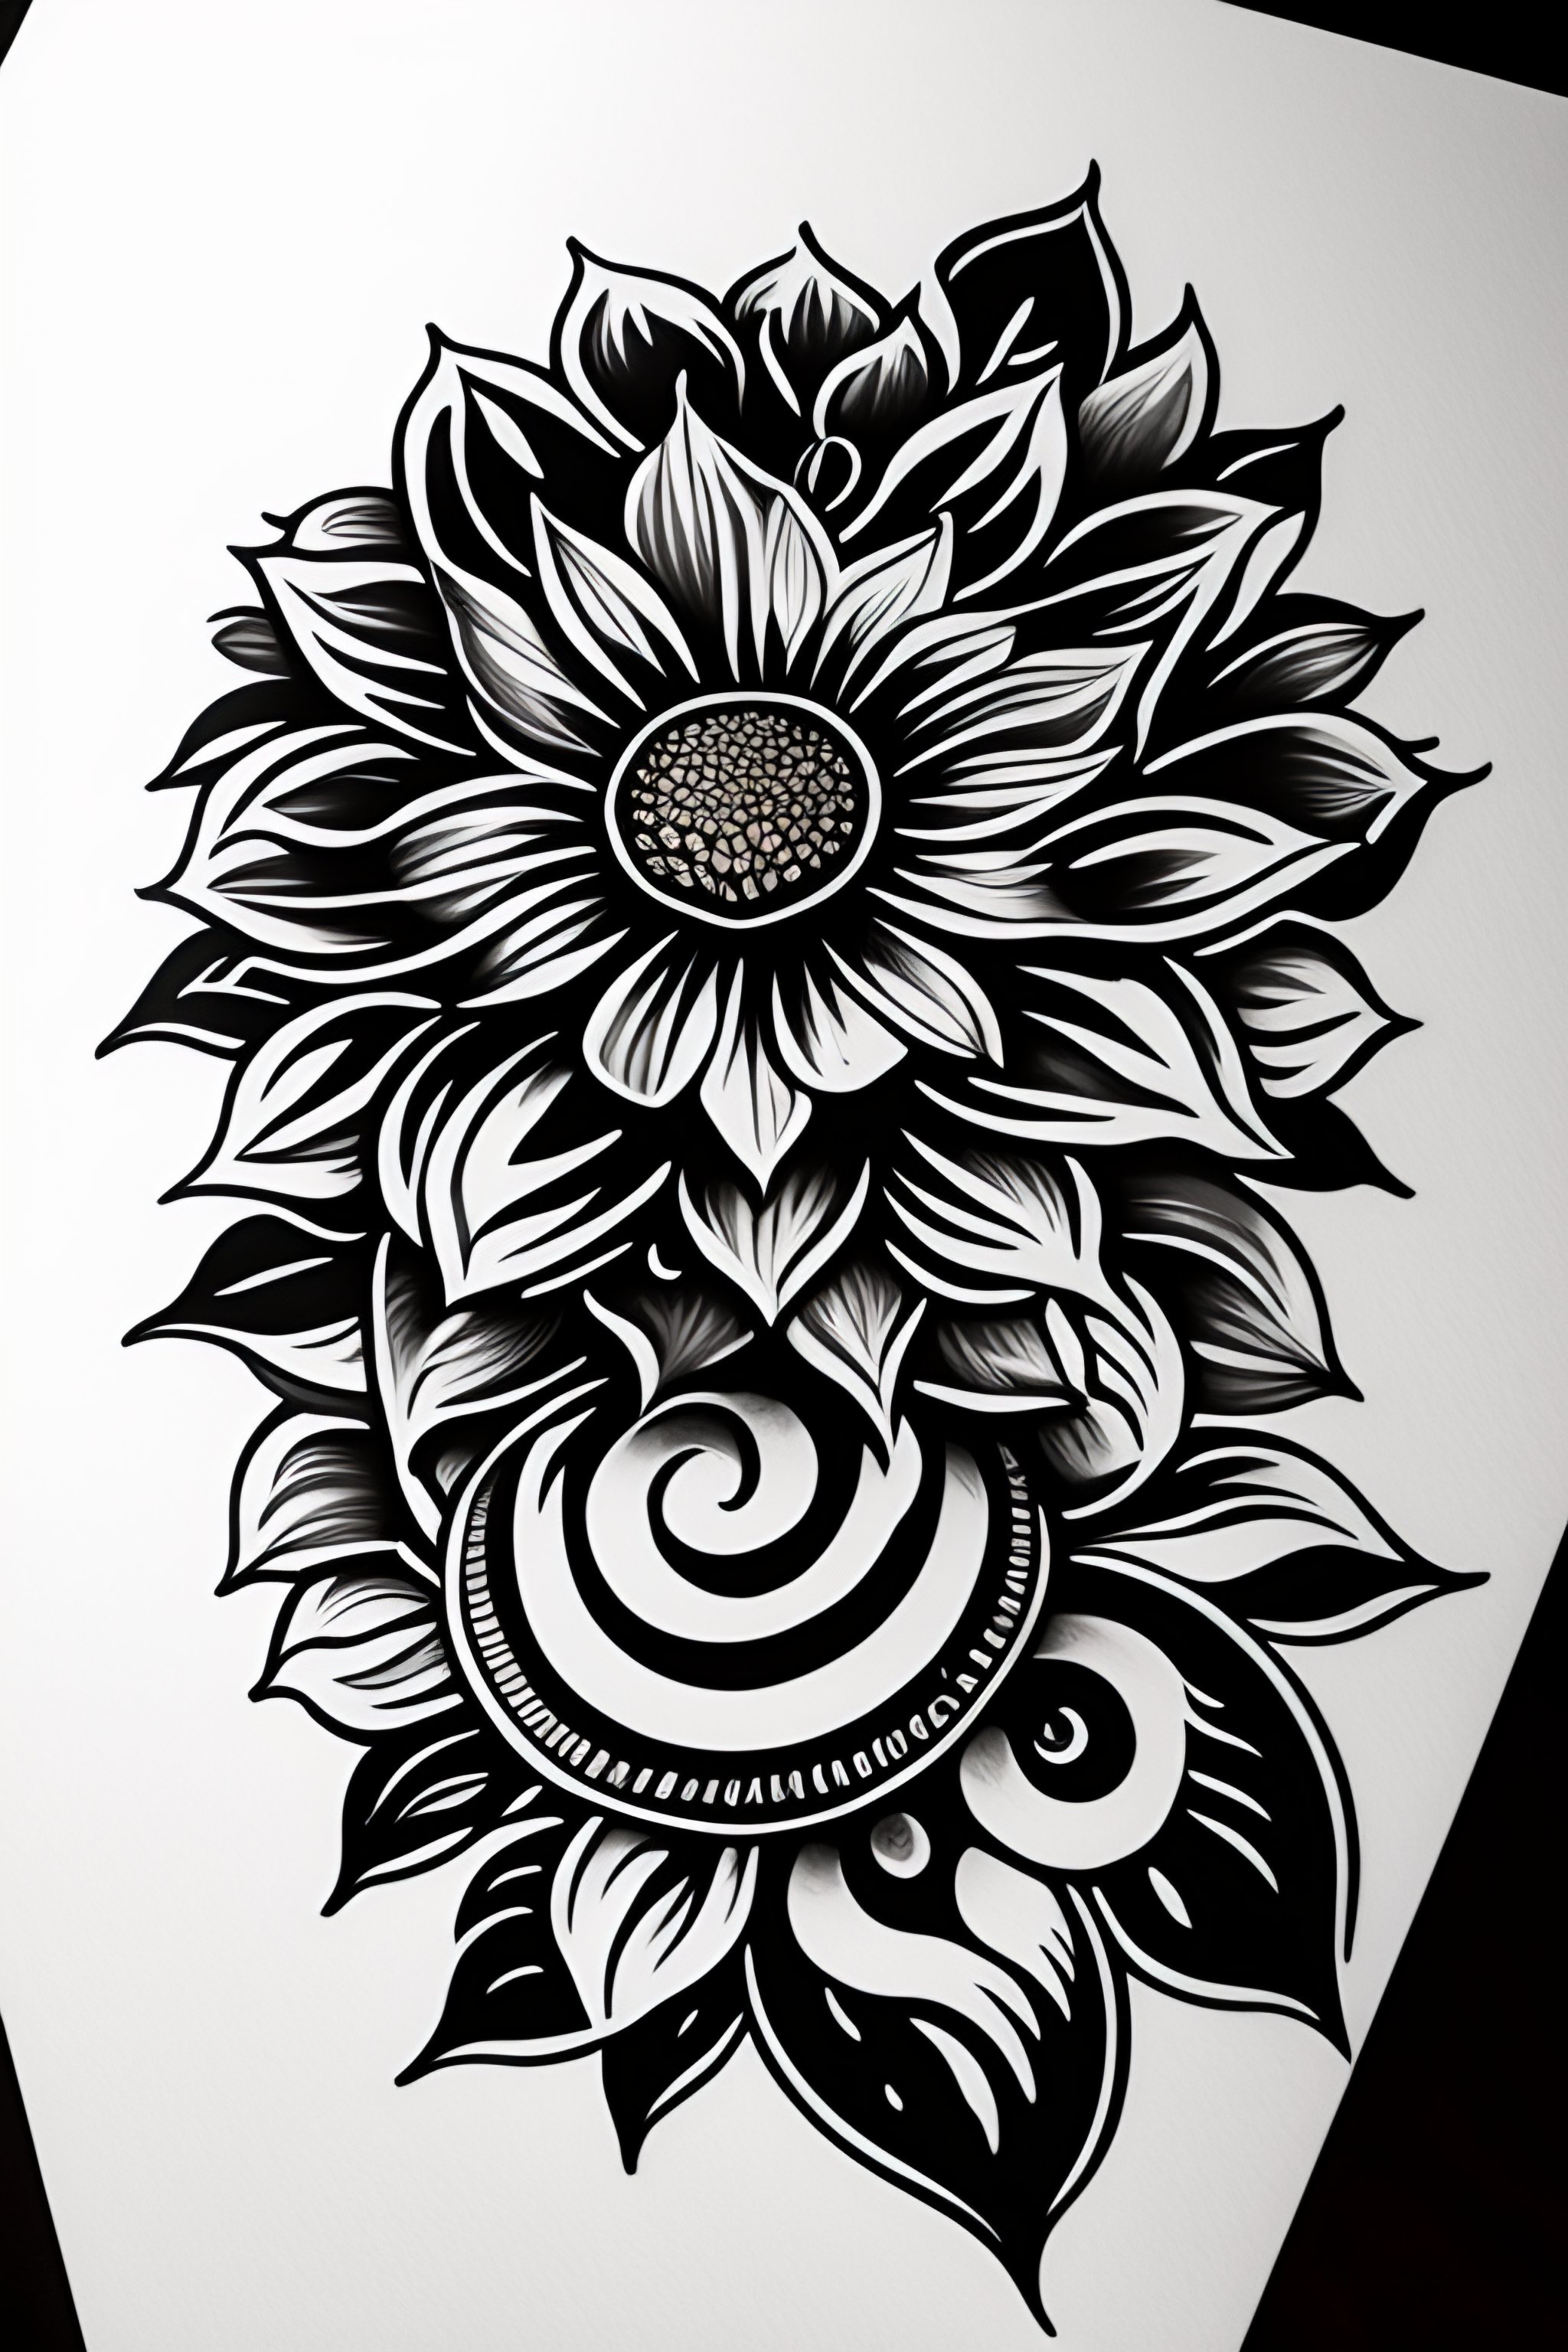 Lexica - Tattoo design, flower simple design on white background, clean black pen drawing